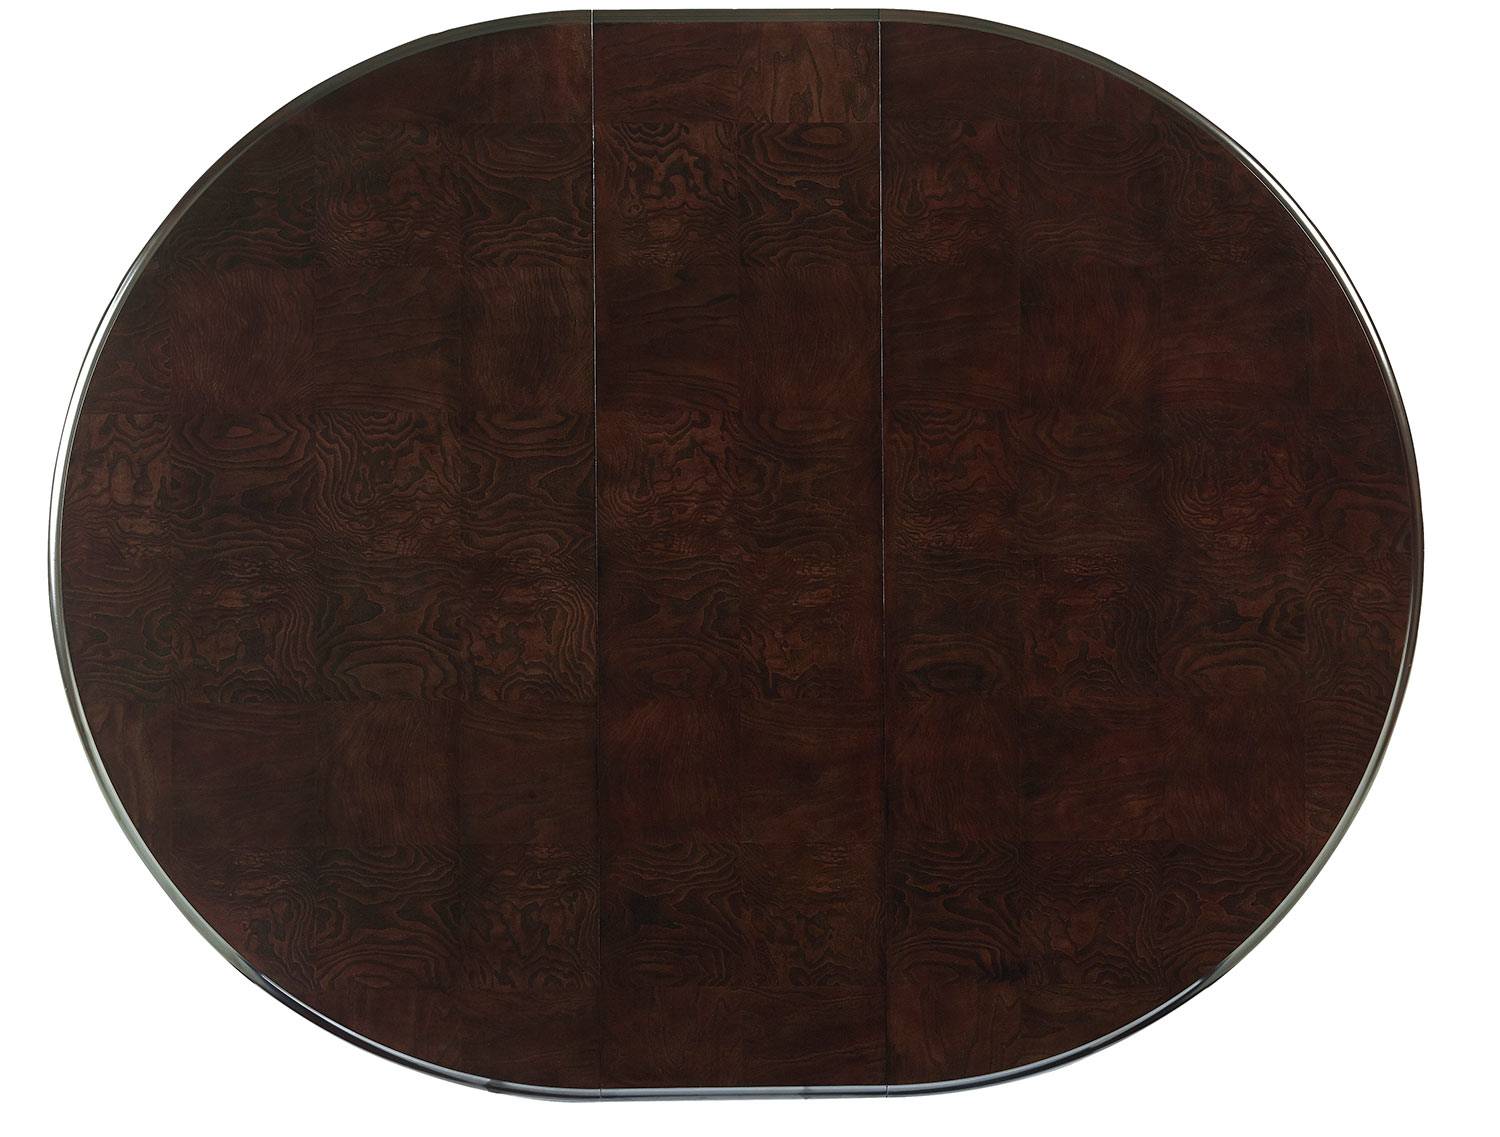 Homelegance Savion Round/Oval Dining Table with Leaf - Espresso